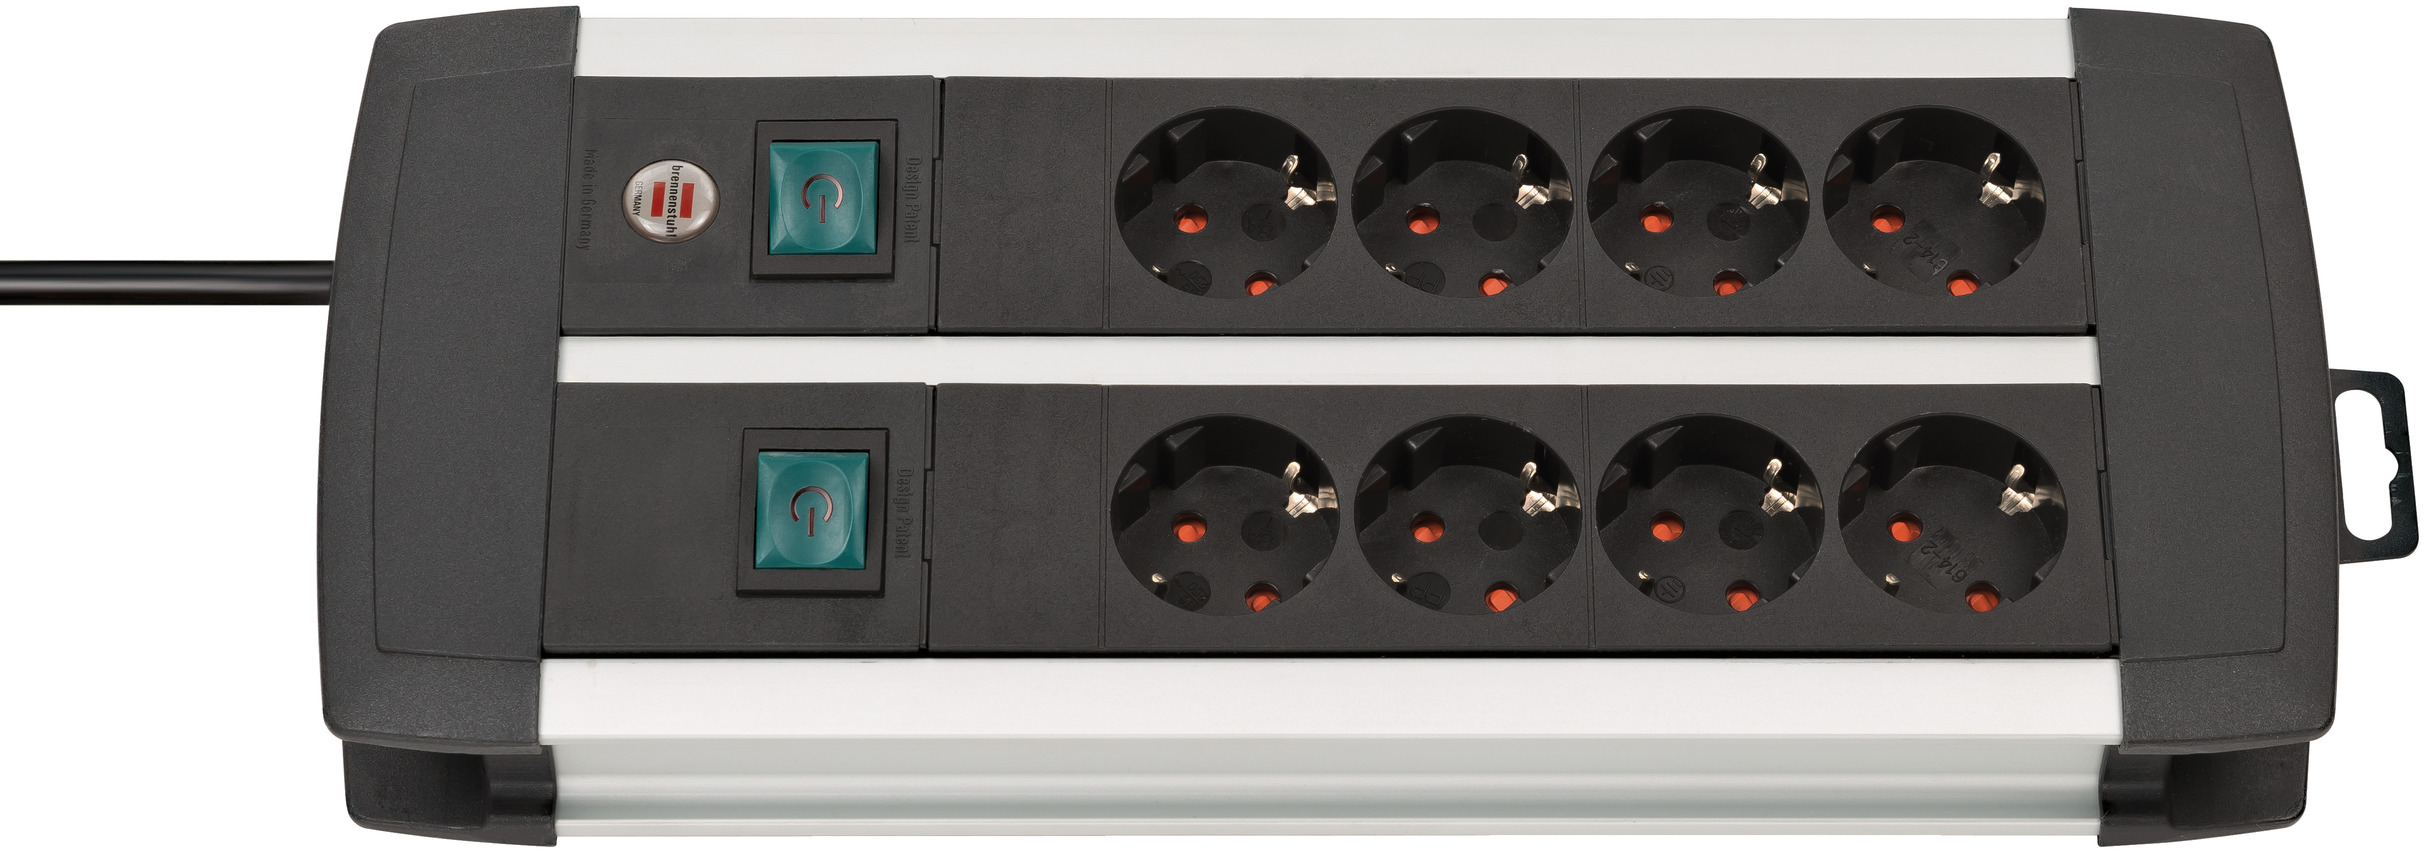 Premium-Alu-Line Technics extension 8-way Duo black 3m H05VV-F 3G1.5 with 4 sockets switched brennenstuhl®